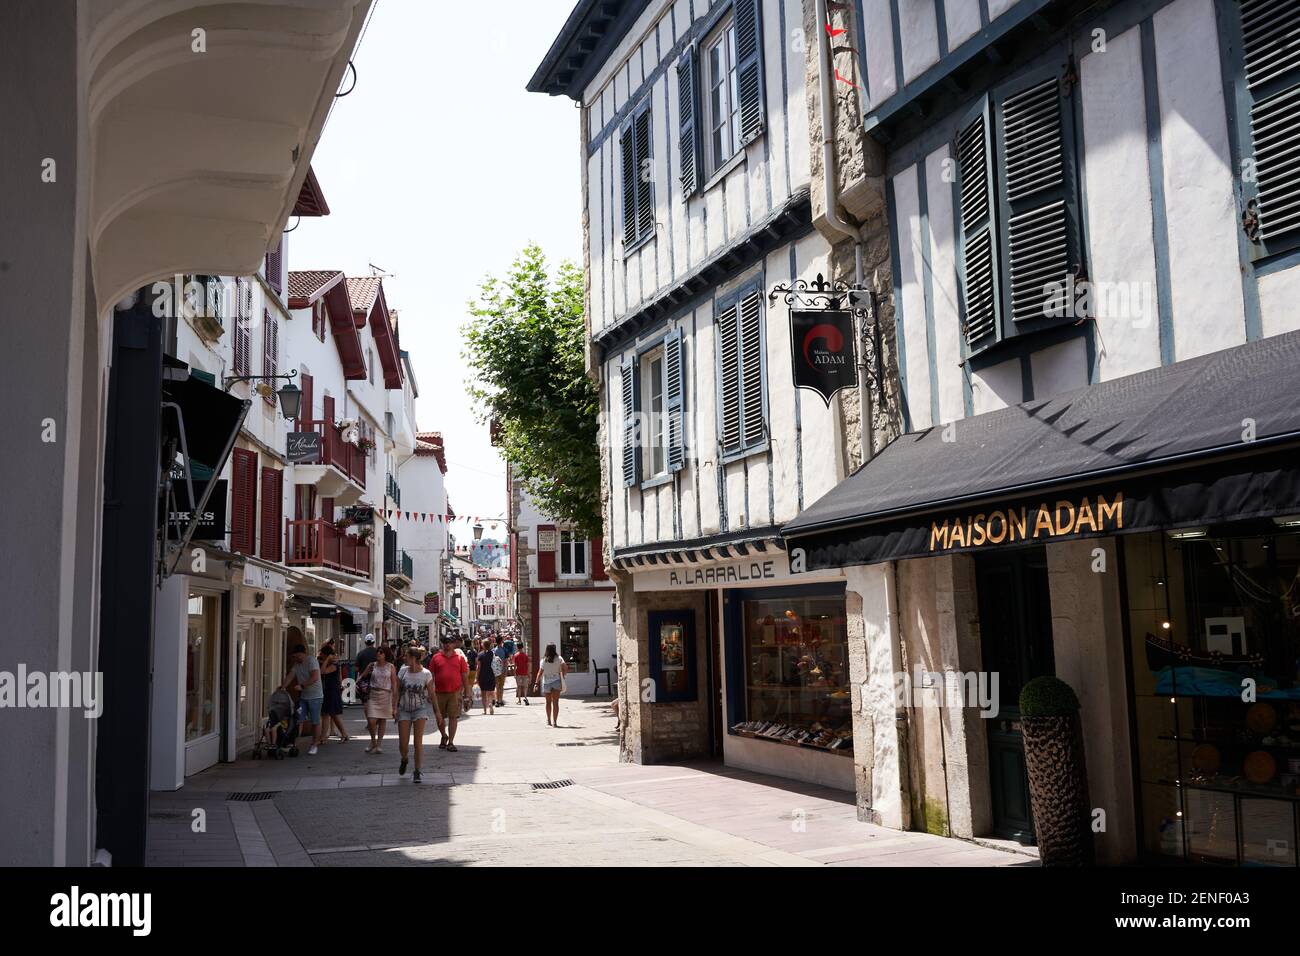 Saint Jean de Luz, France - July 22, 2019 - shopping in the narrow streets.Afternoon shopping in a beautiful small seaside resort  from fashion bouti Stock Photo